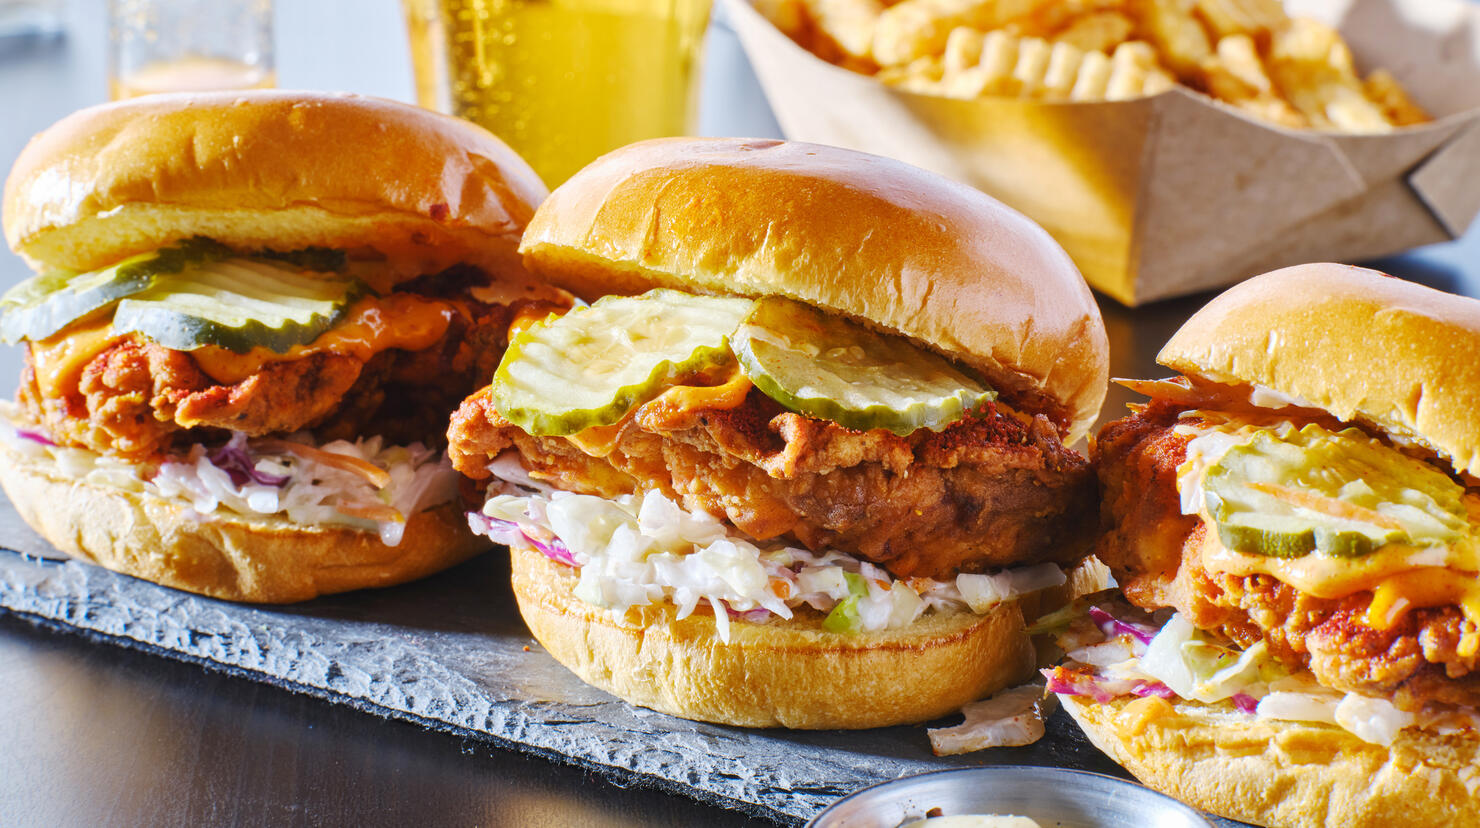 spicy nashville hot chicken sandwich with coleslaw and pickles